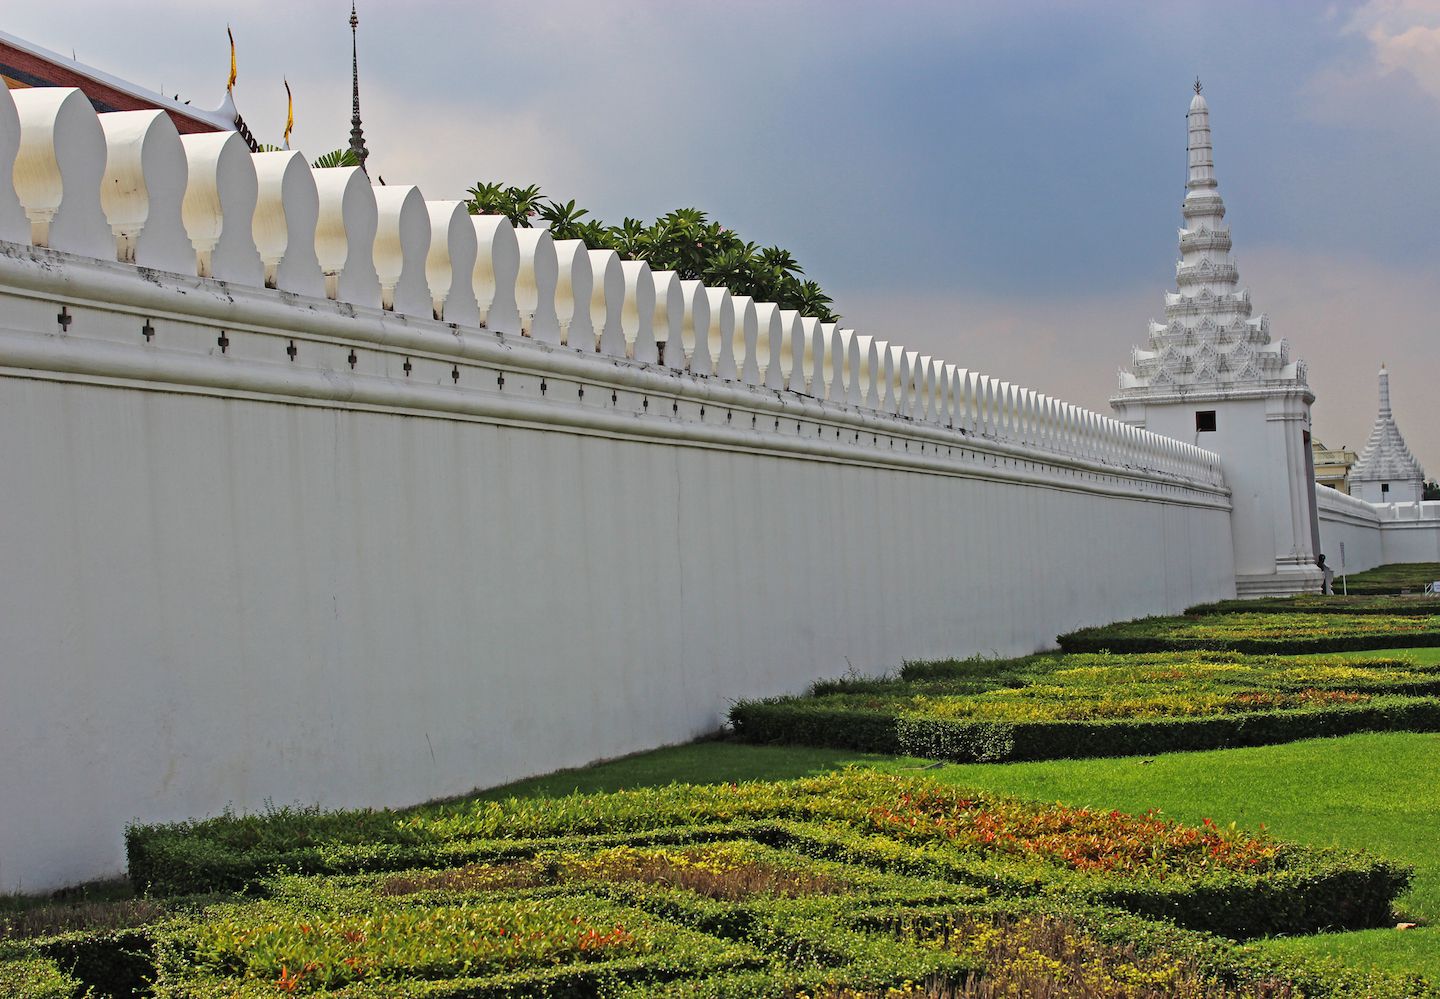 Walls of the Grand Palace